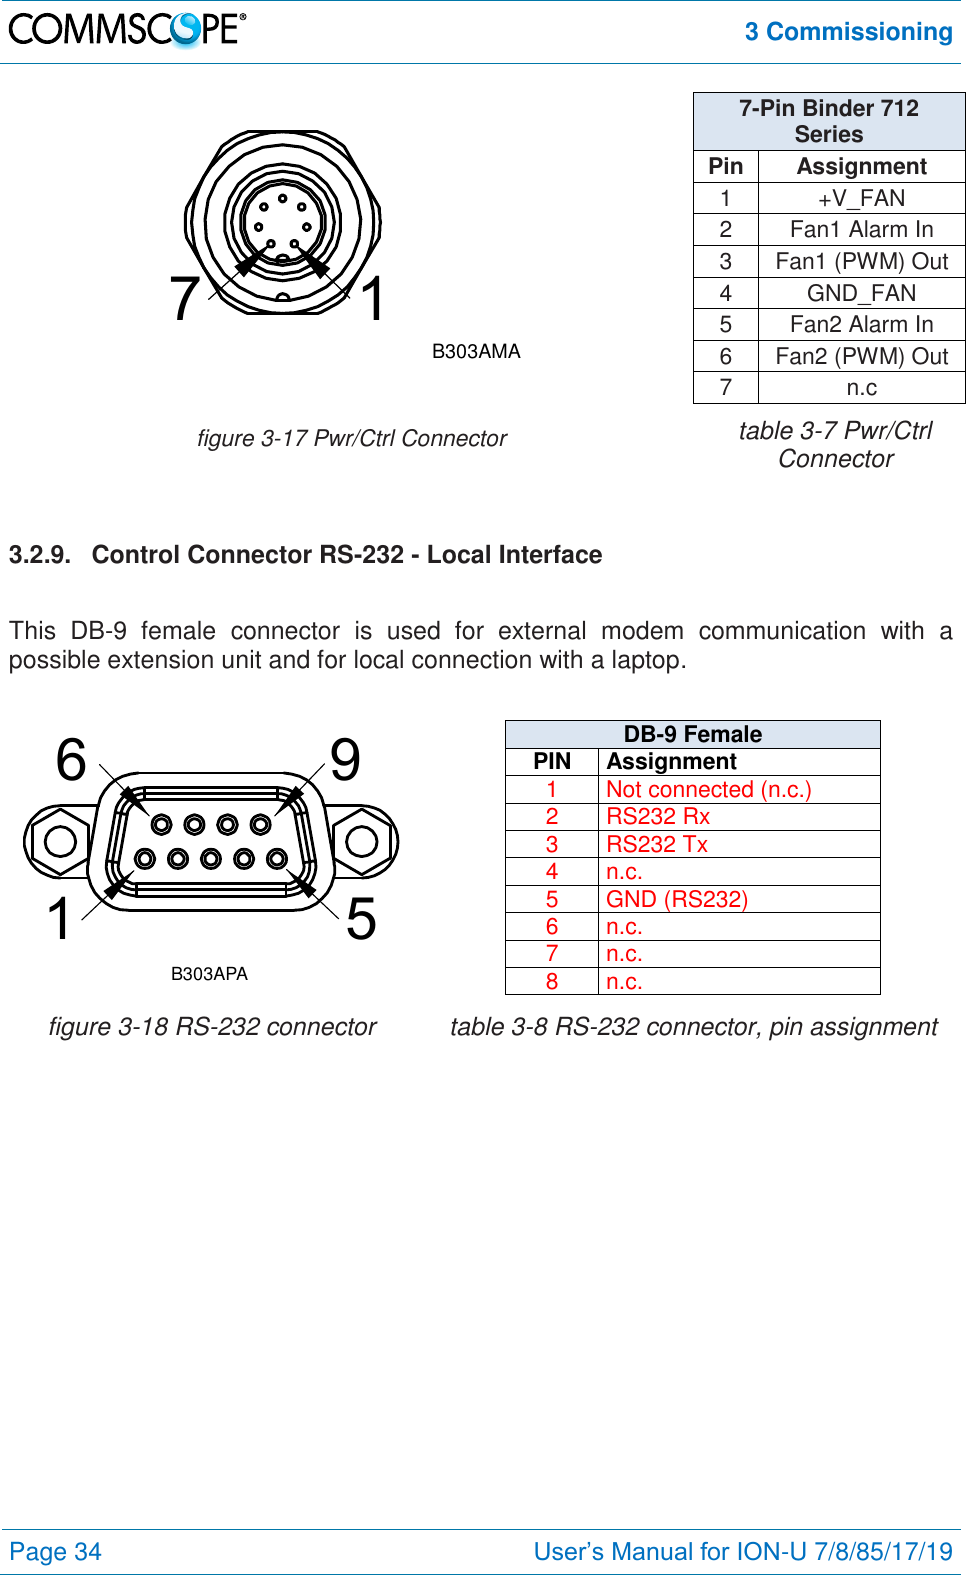  3 Commissioning  Page 34 User’s Manual for ION-U 7/8/85/17/19  7 1B303AMA 7-Pin Binder 712 Series Pin Assignment 1 +V_FAN 2 Fan1 Alarm In 3 Fan1 (PWM) Out 4 GND_FAN 5 Fan2 Alarm In 6 Fan2 (PWM) Out 7 n.c  figure 3-17 Pwr/Ctrl Connector table 3-7 Pwr/Ctrl Connector  3.2.9.  Control Connector RS-232 - Local Interface  This  DB-9  female  connector  is  used  for  external  modem  communication  with  a possible extension unit and for local connection with a laptop.  1659B303APA   DB-9 Female PIN Assignment 1 Not connected (n.c.) 2 RS232 Rx 3 RS232 Tx 4 n.c. 5 GND (RS232) 6 n.c. 7 n.c. 8 n.c. figure 3-18 RS-232 connector table 3-8 RS-232 connector, pin assignment 